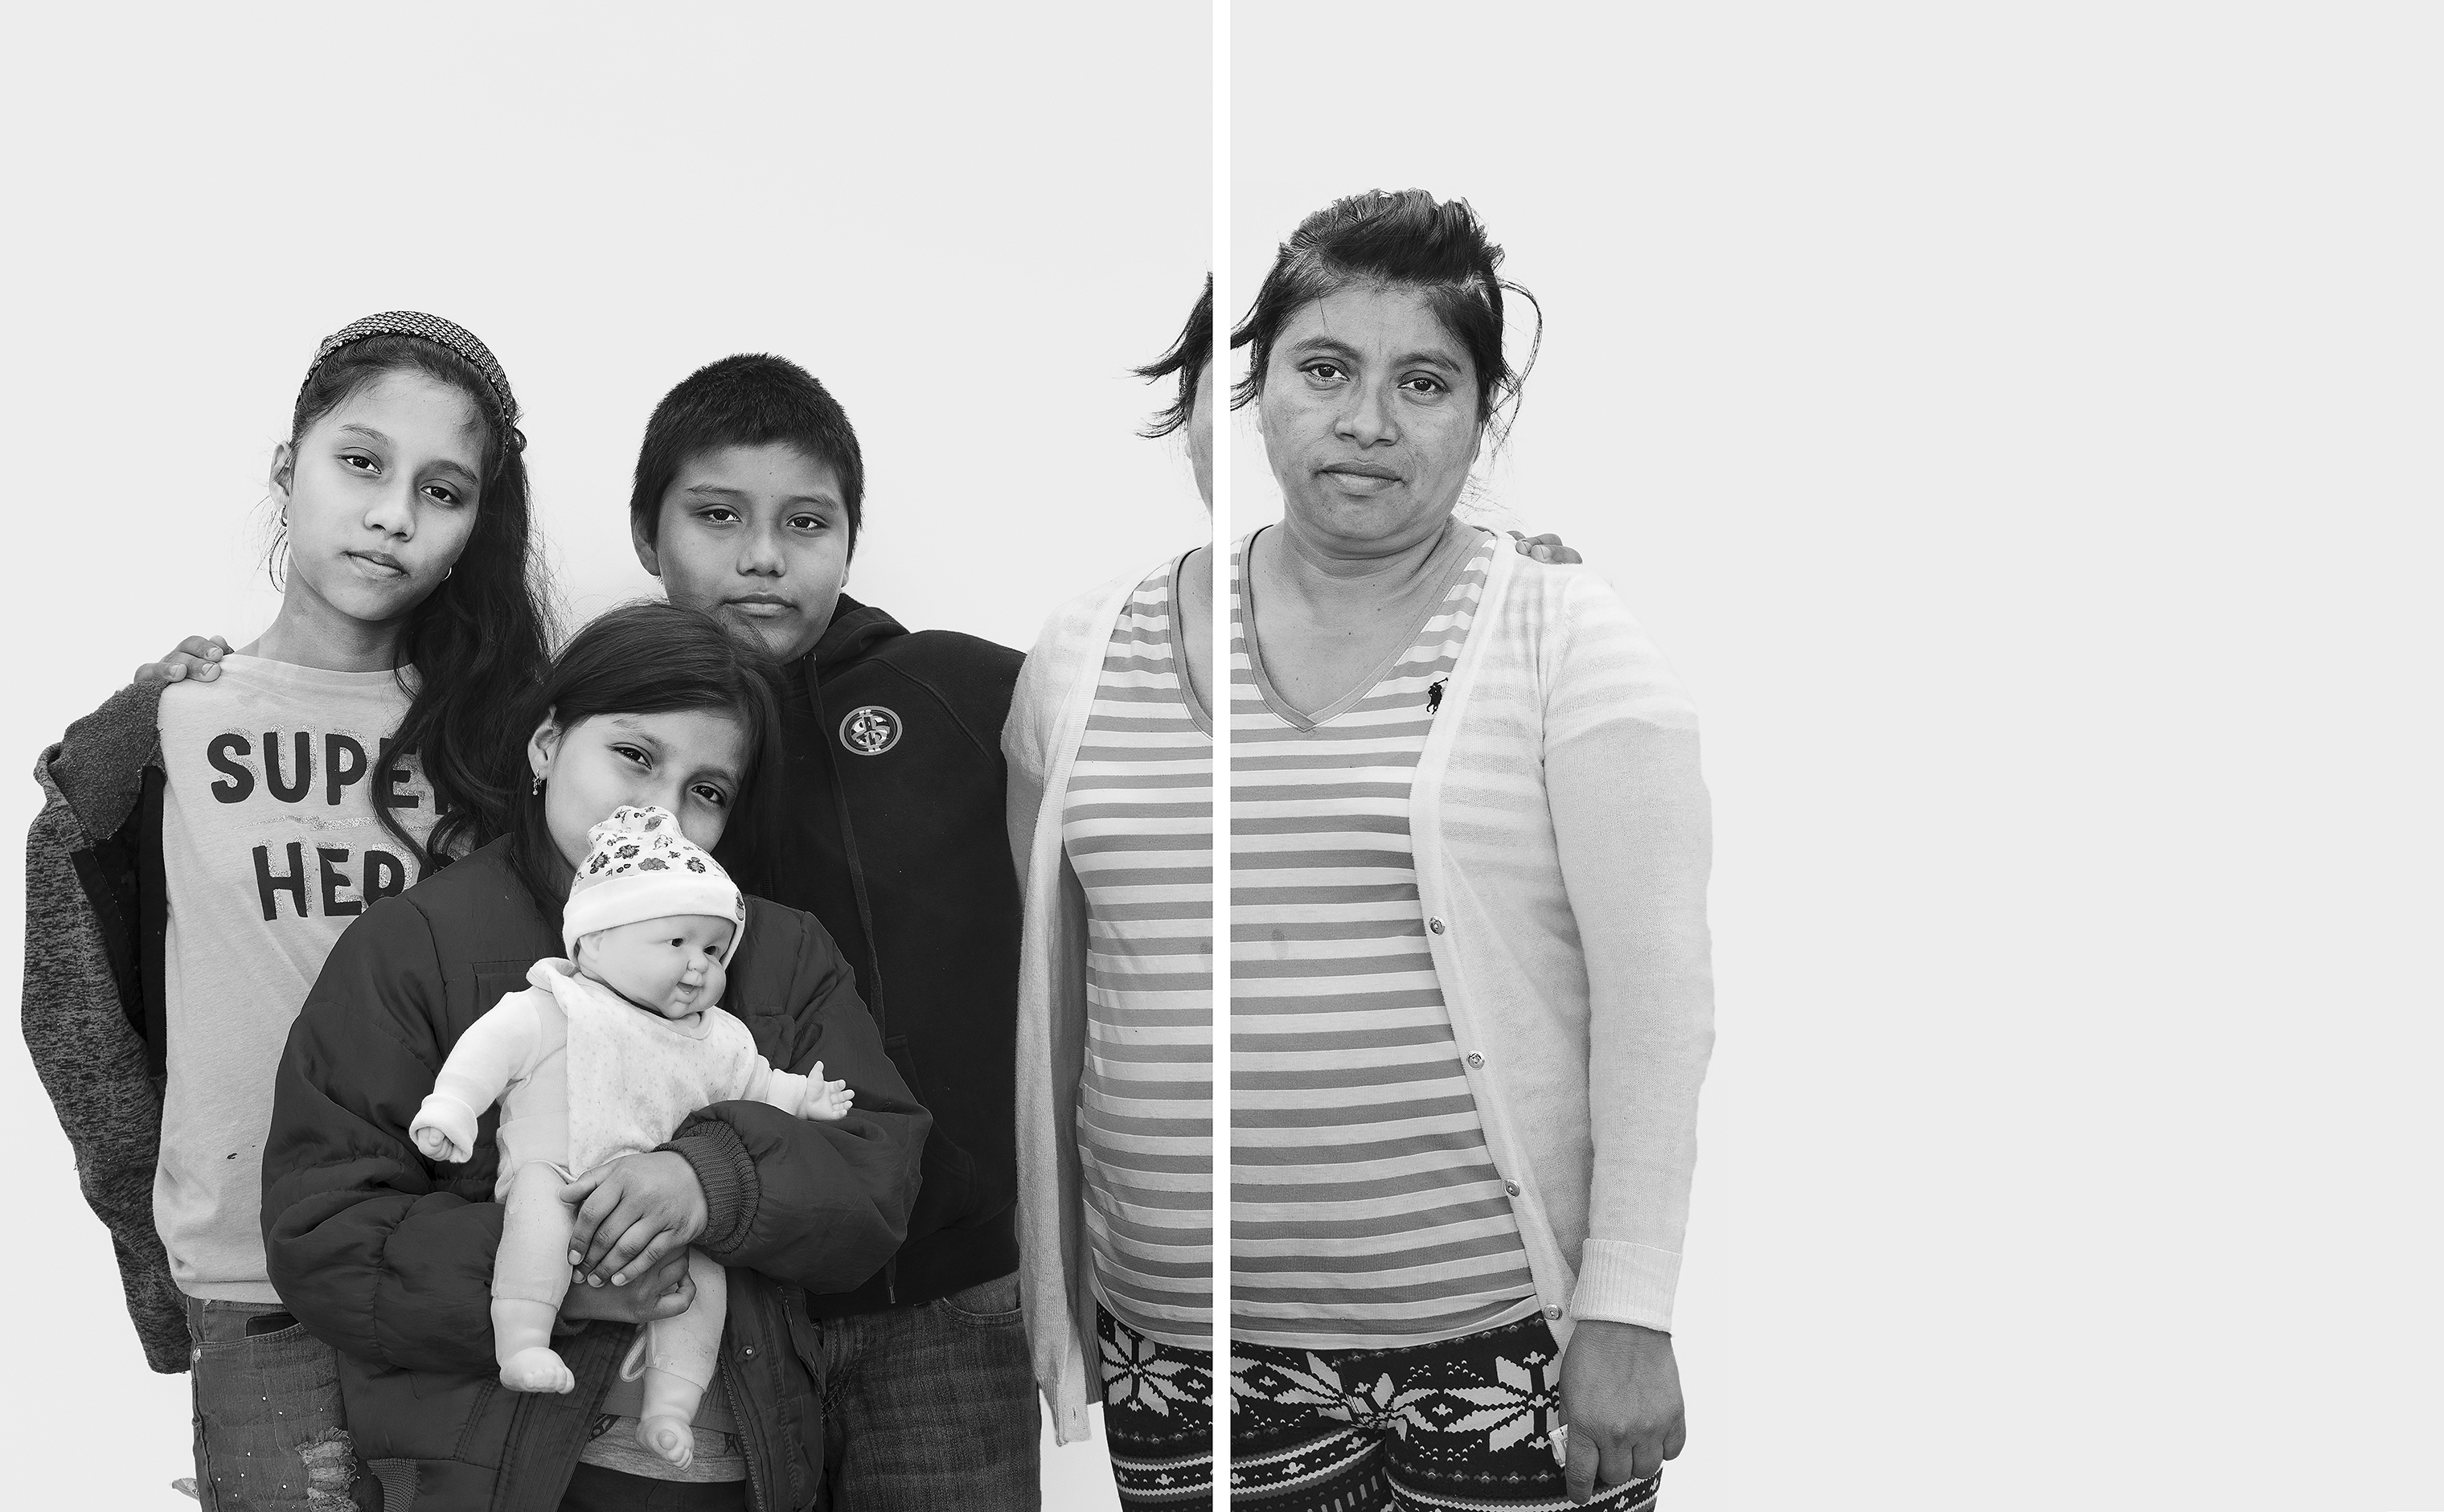 Violeta Monterroso, 42, and her children, Kenia, 12; Isaac, 11; and Yeimi, 9. Monterroso fled Guatemala in mid-October 2018 with her husband, Cándido Calderón, 42. Gang members threatened to kill Calderón and Monterroso’s children if they did not pay roughly $1,200—the equivalent of five months’ income from the family’s juice stall. (Davide Monteleone for TIME)